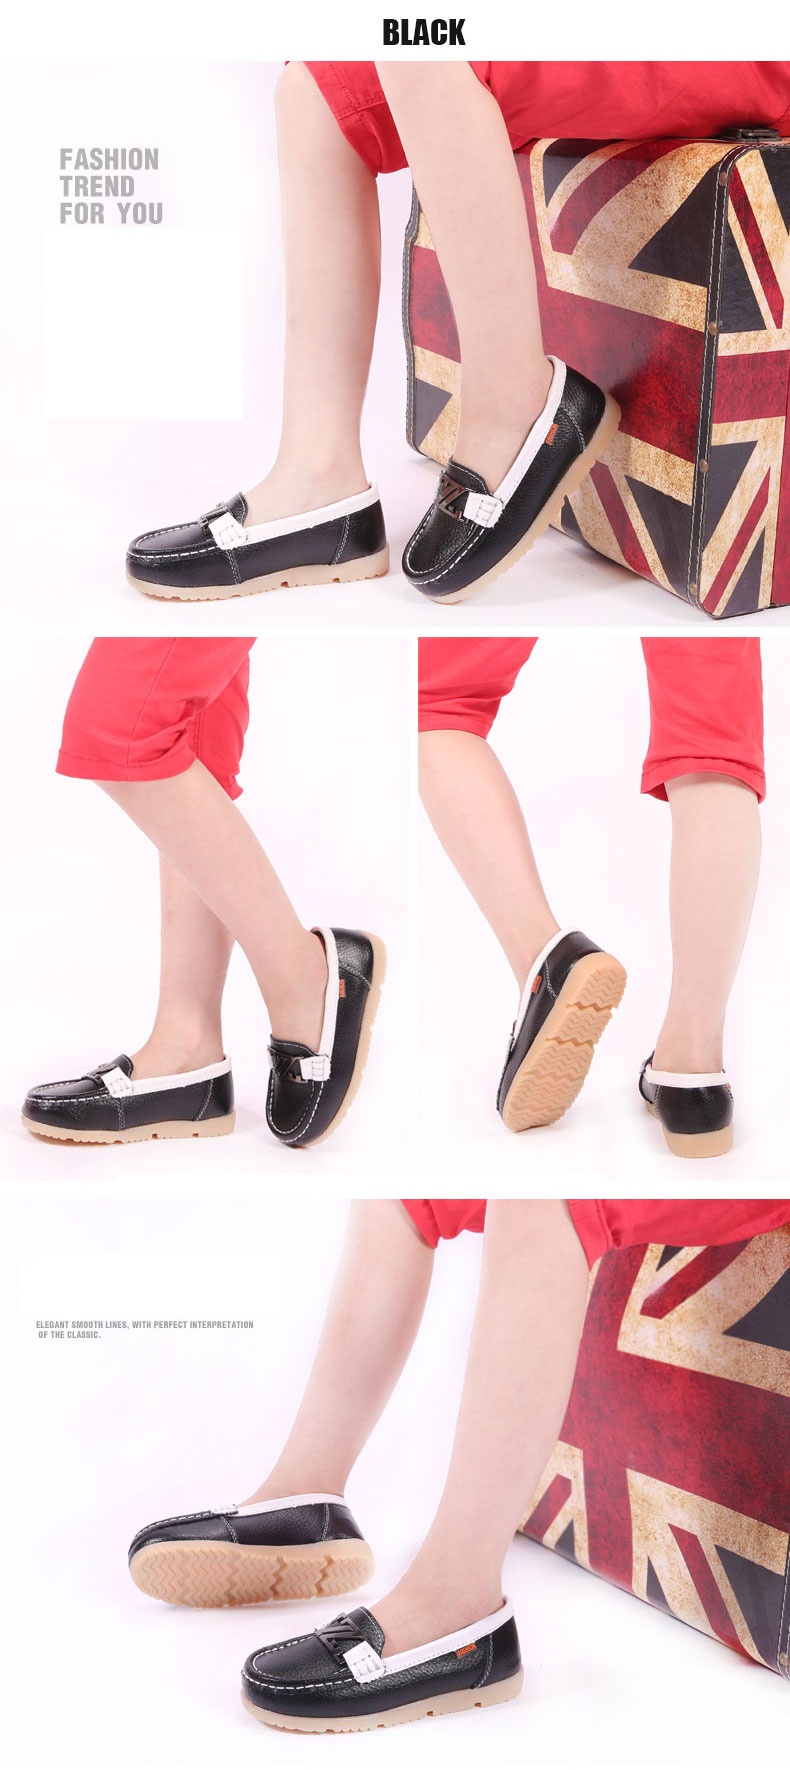 Children-Casual-Shoes-Flats-Soft-Sole-Leather-Sneakers-Slip-on-Loafers-Boat-Footwear-1043359